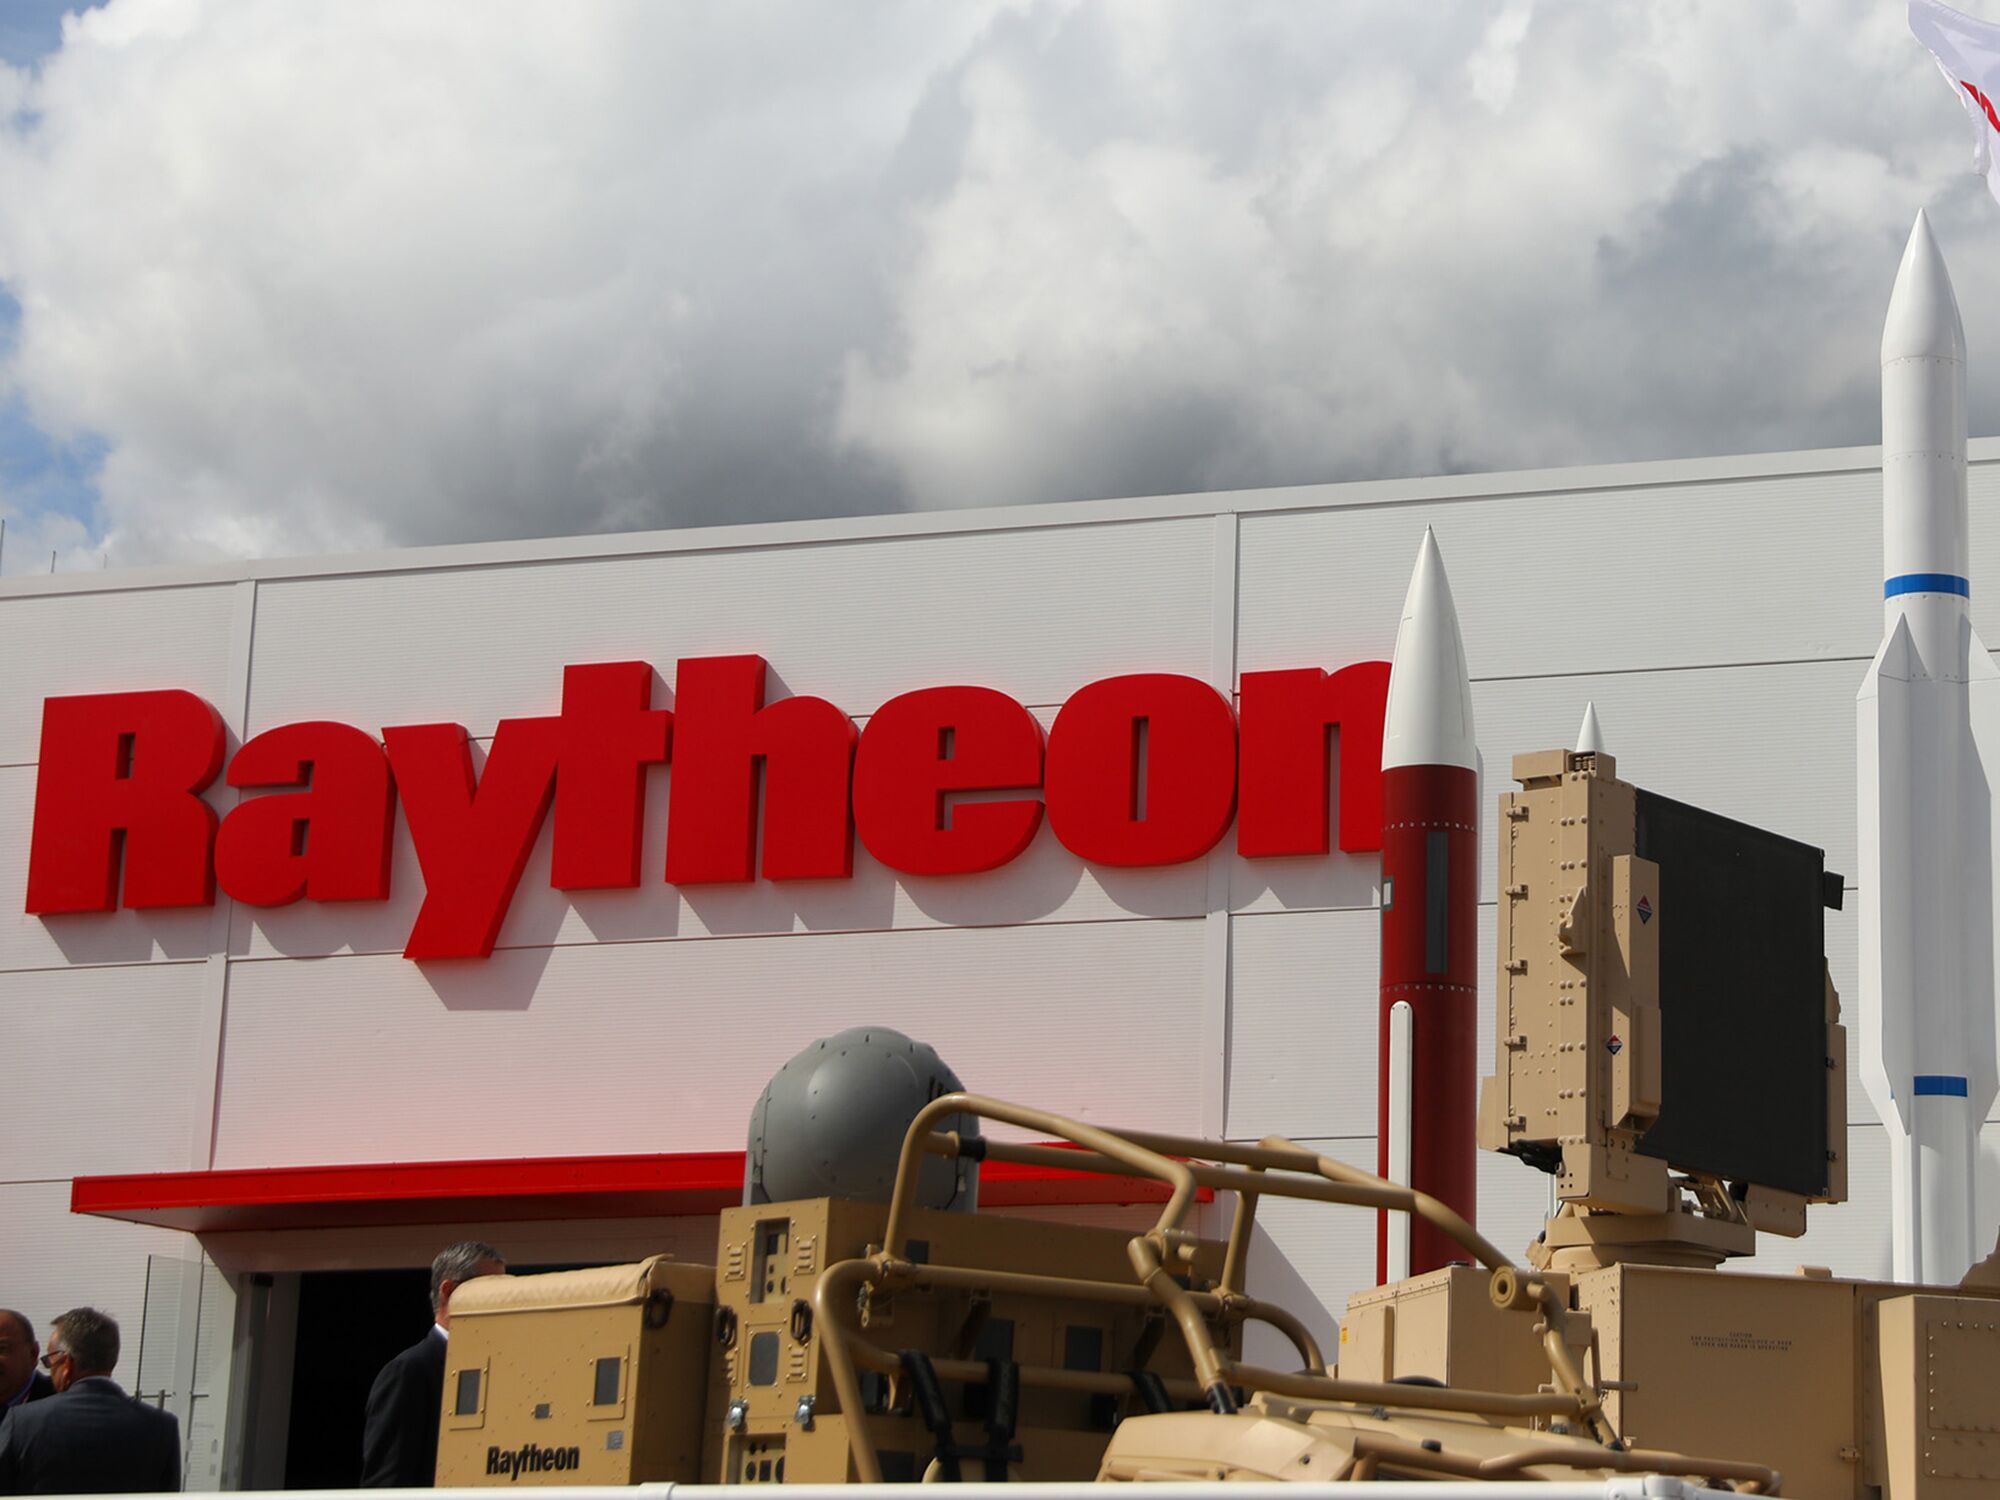 What is Raytheon called now?